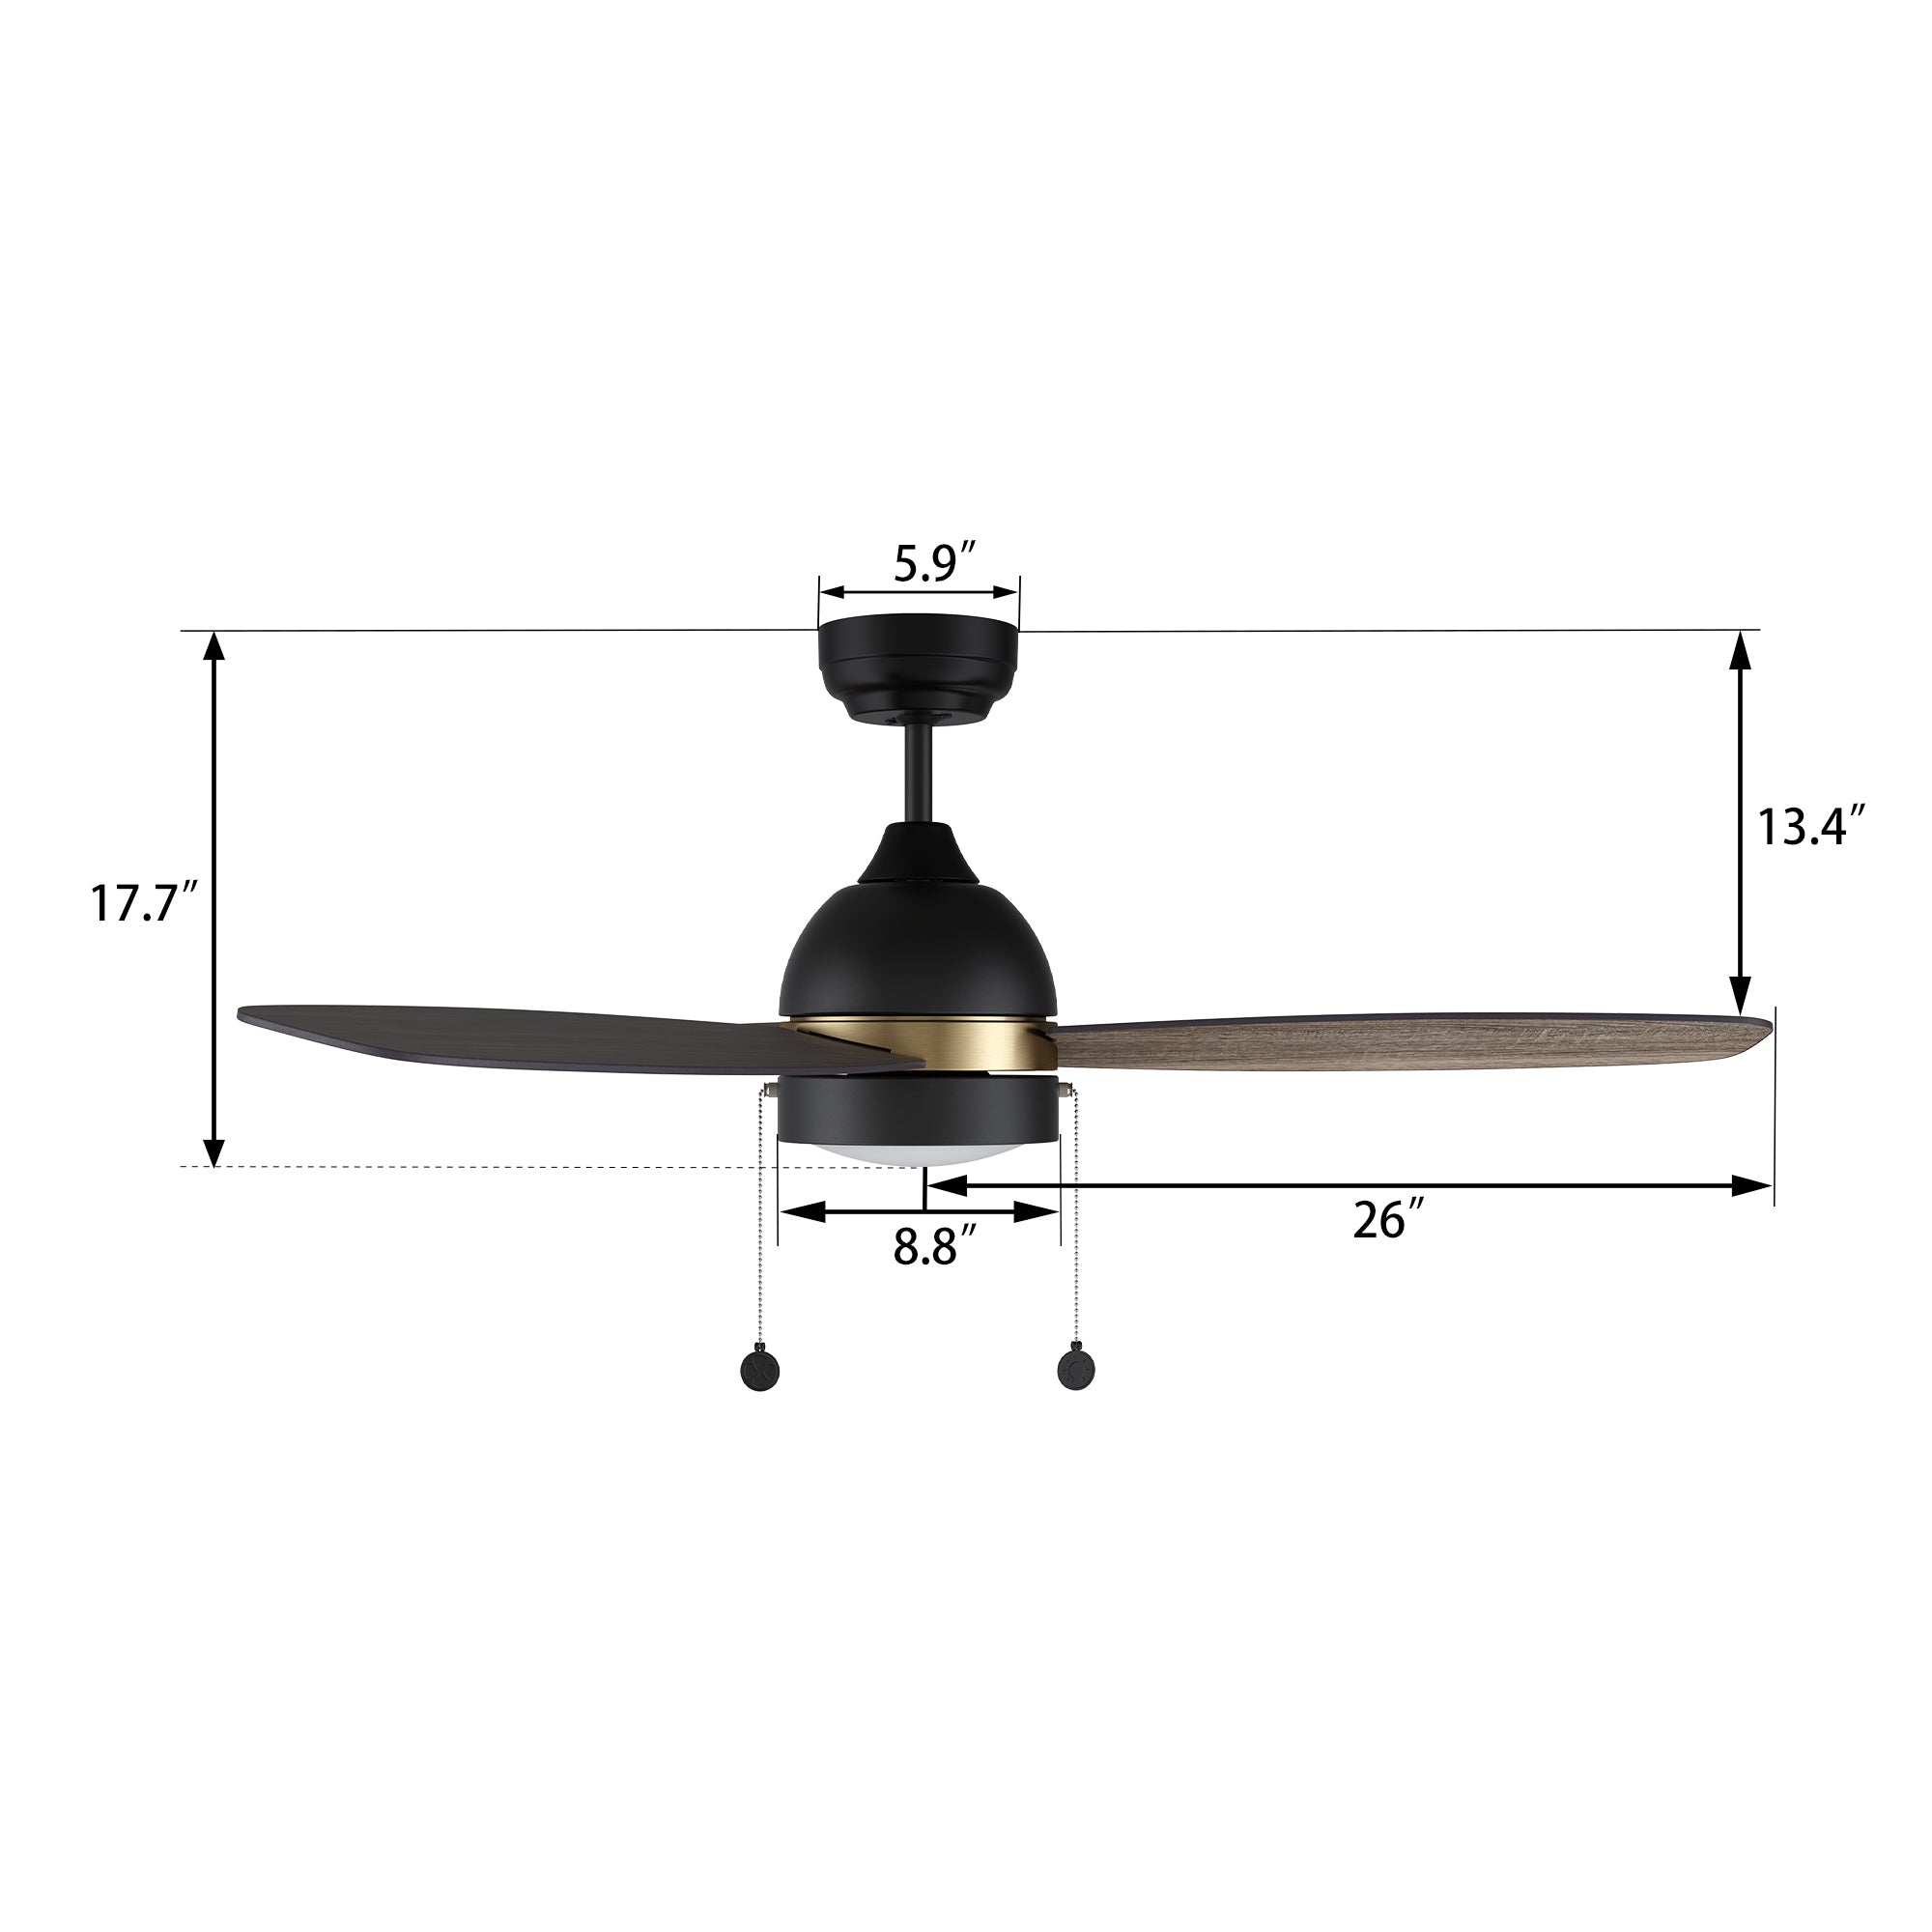 Detail size of Carro flush mount Tesoro 52 inch pull chain ceiling fan with light, indoor use only. 